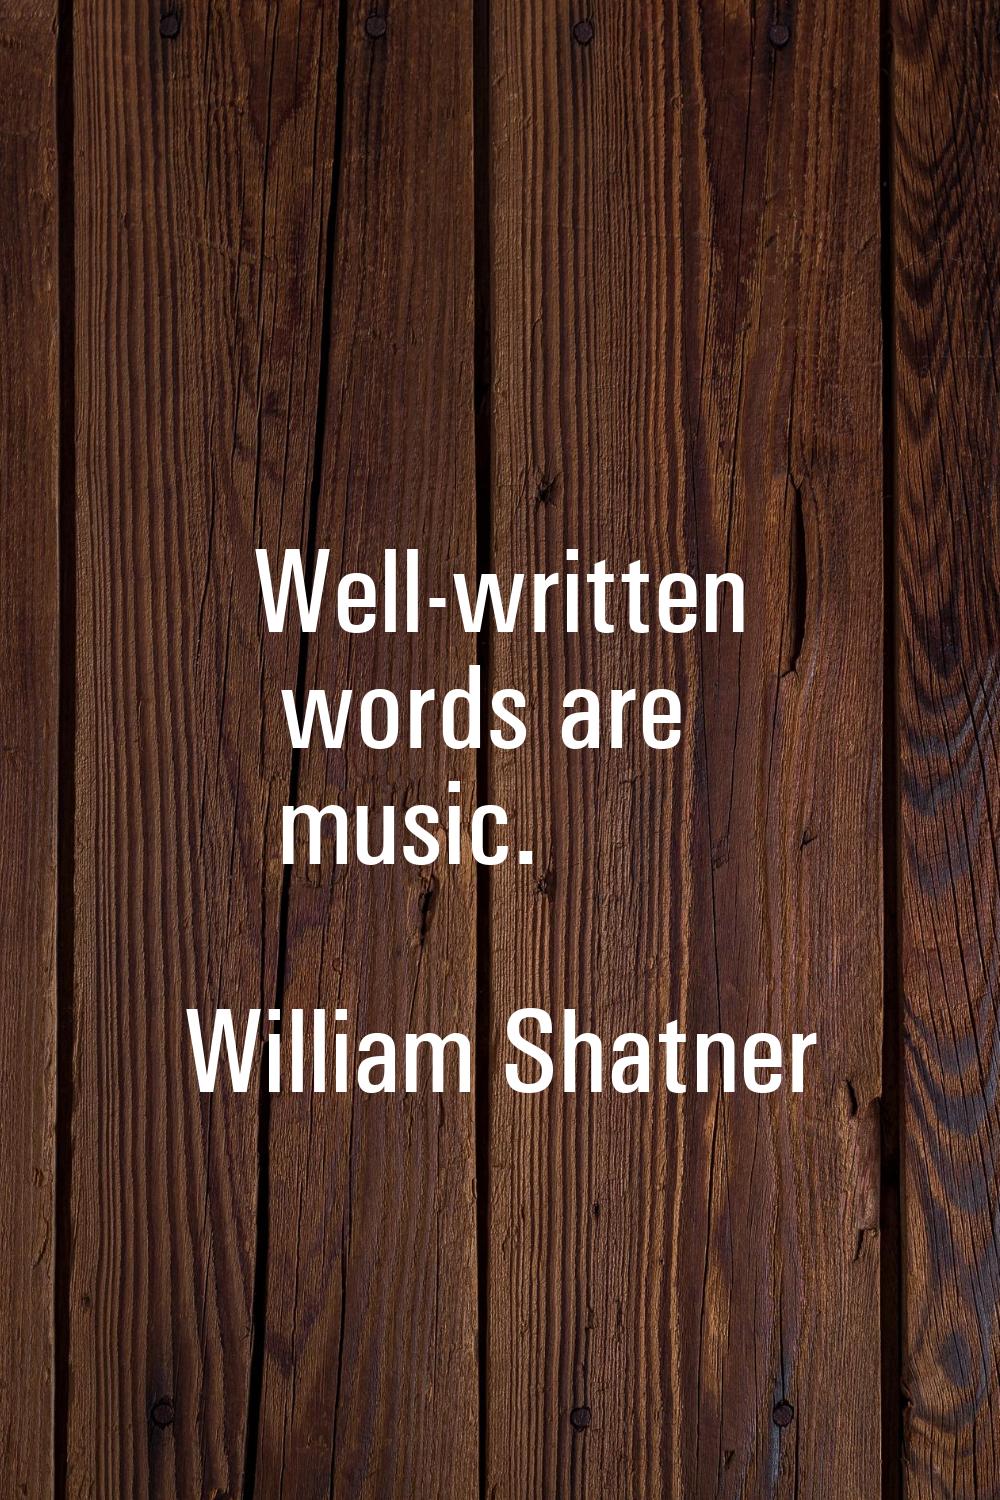 Well-written words are music.